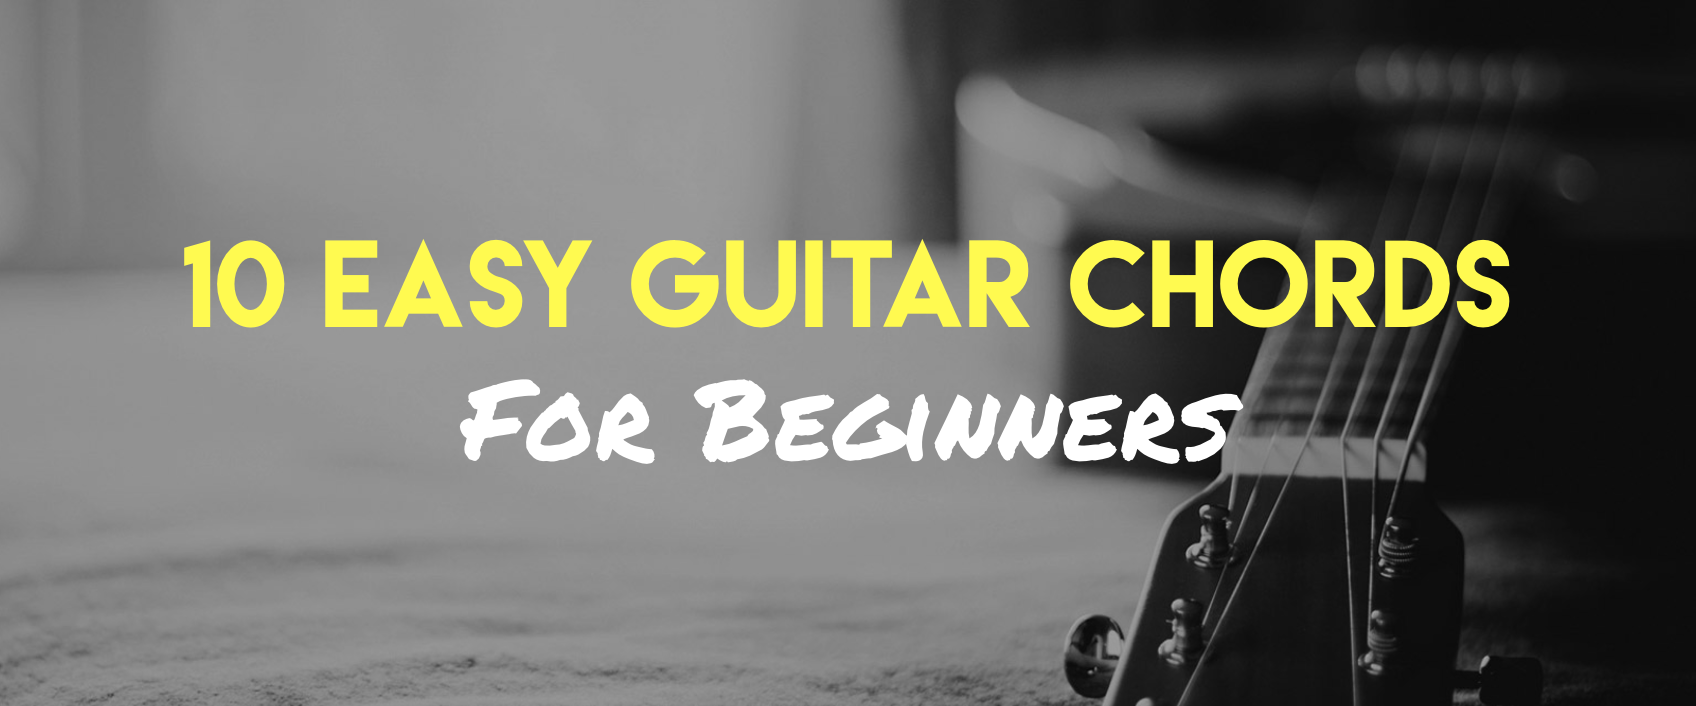 easy chords to play on guitar